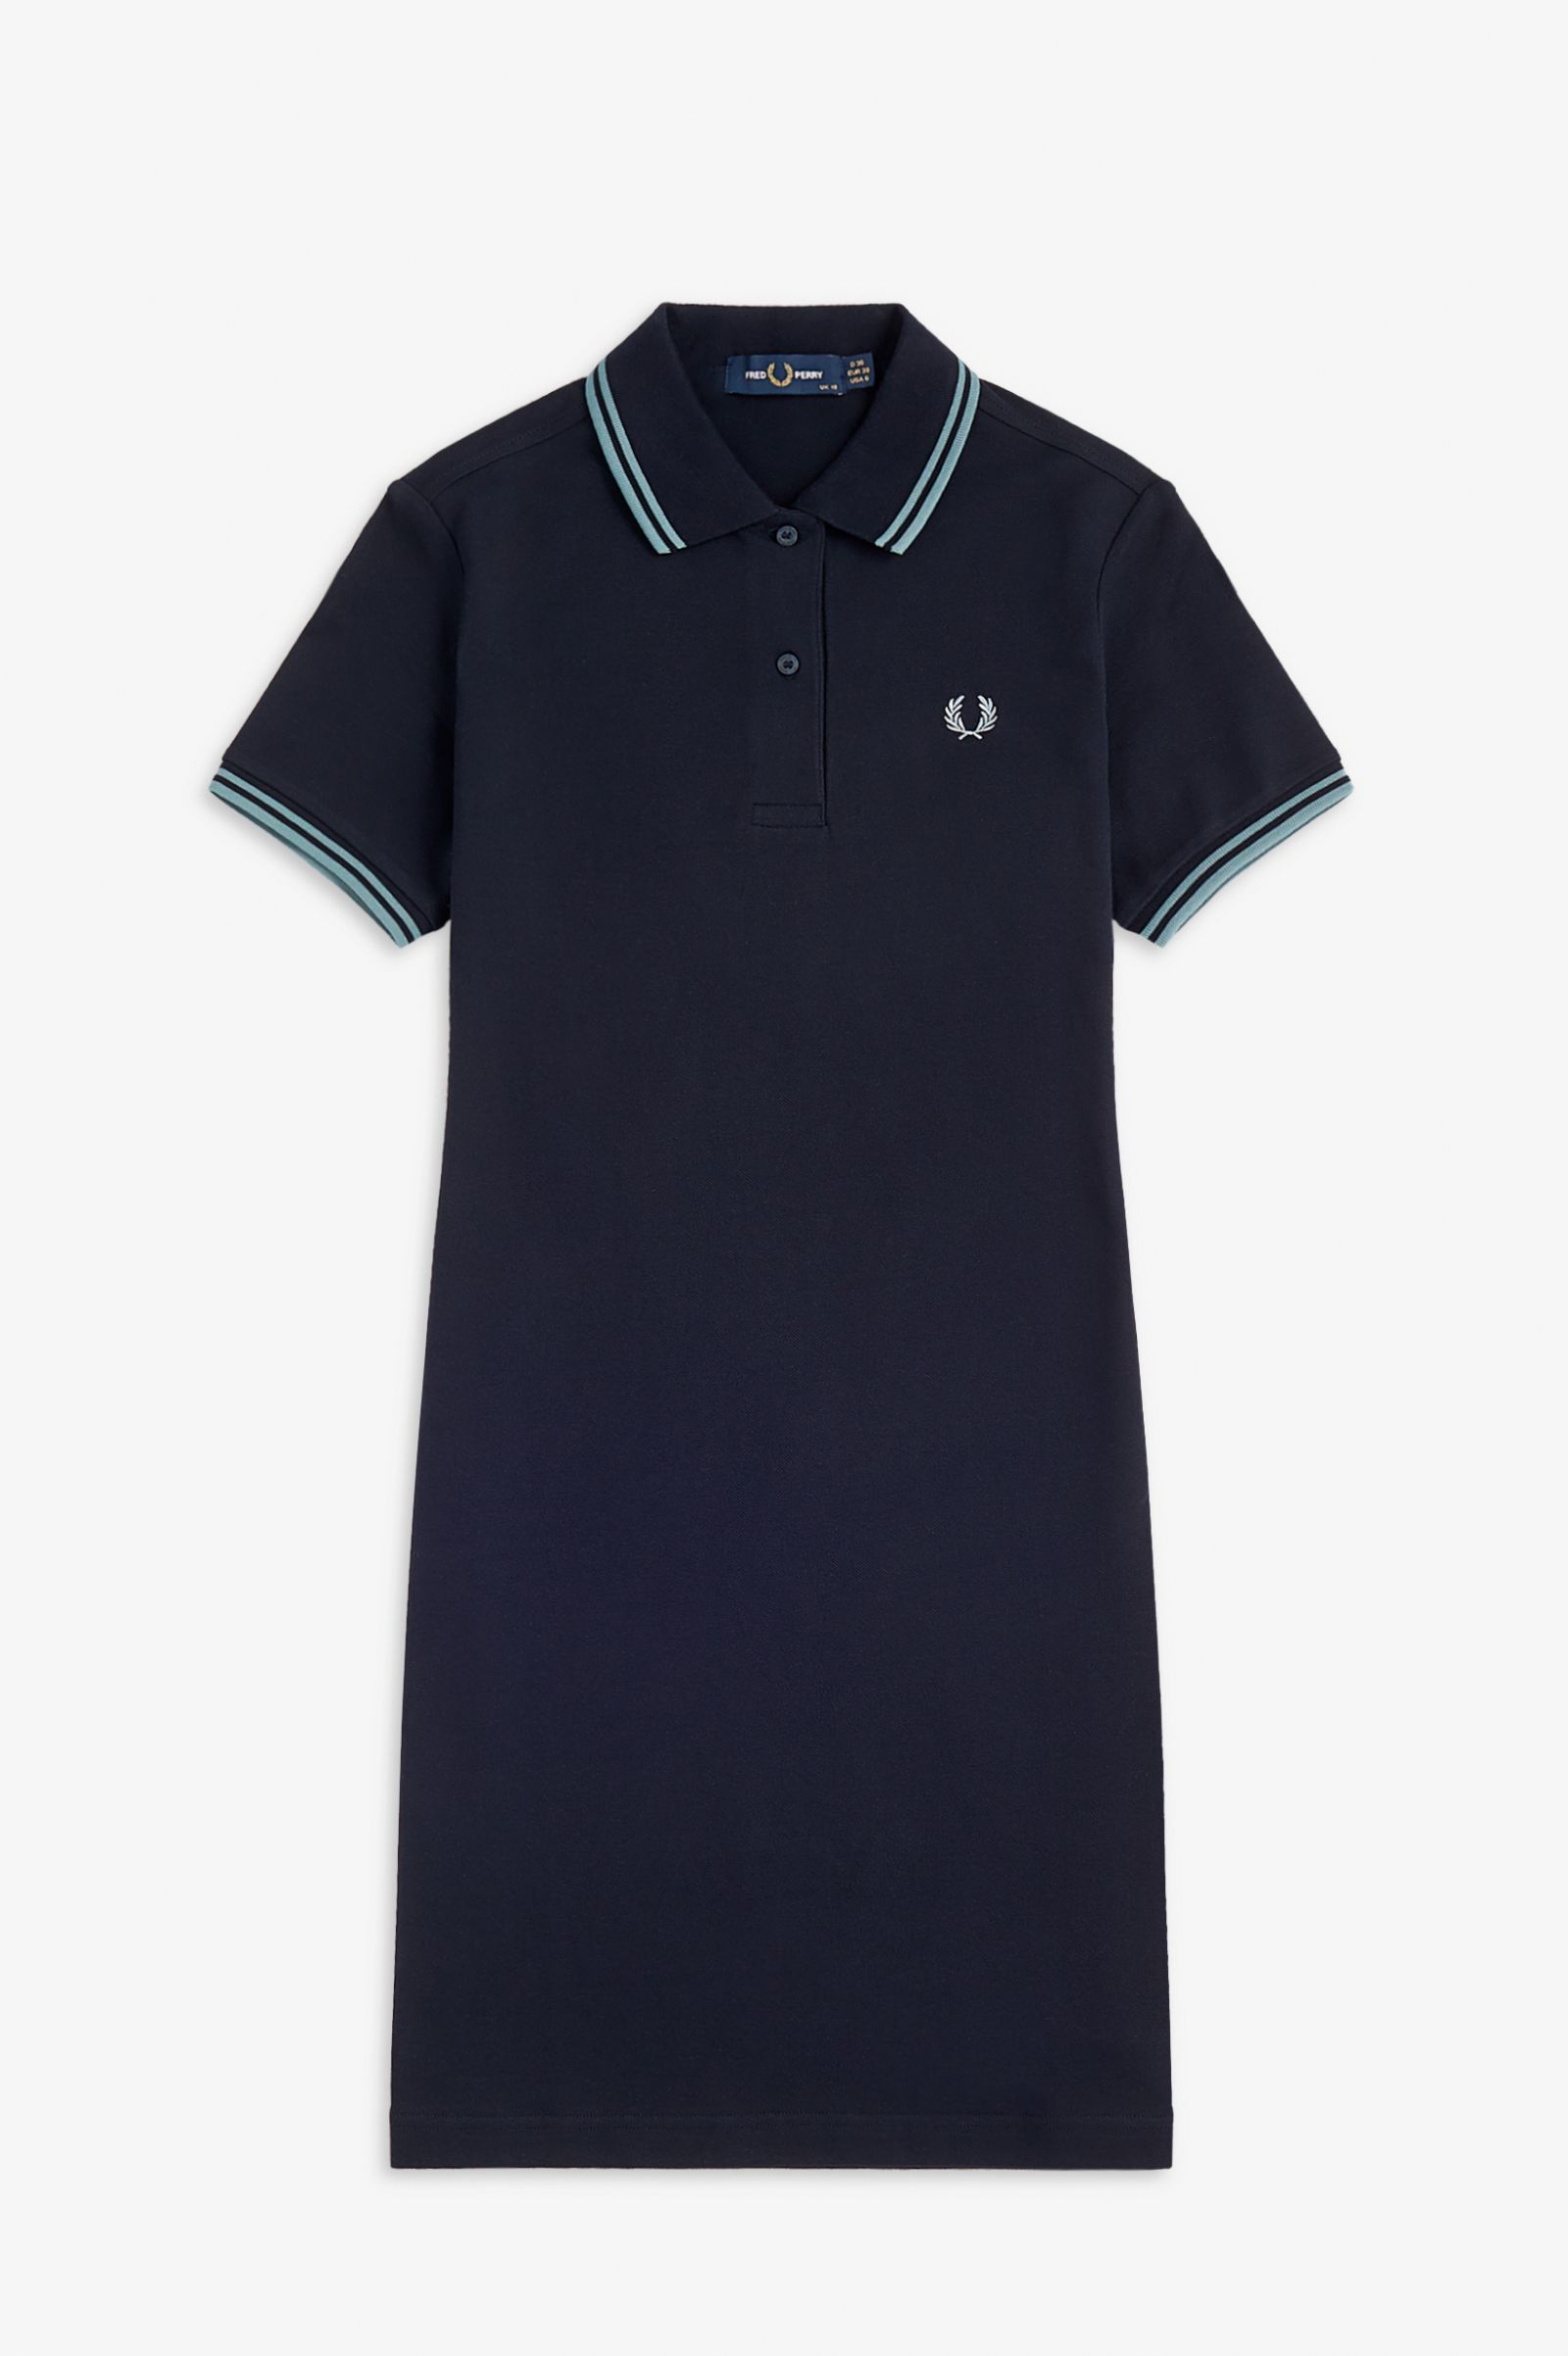 fred perry twin tipped dress